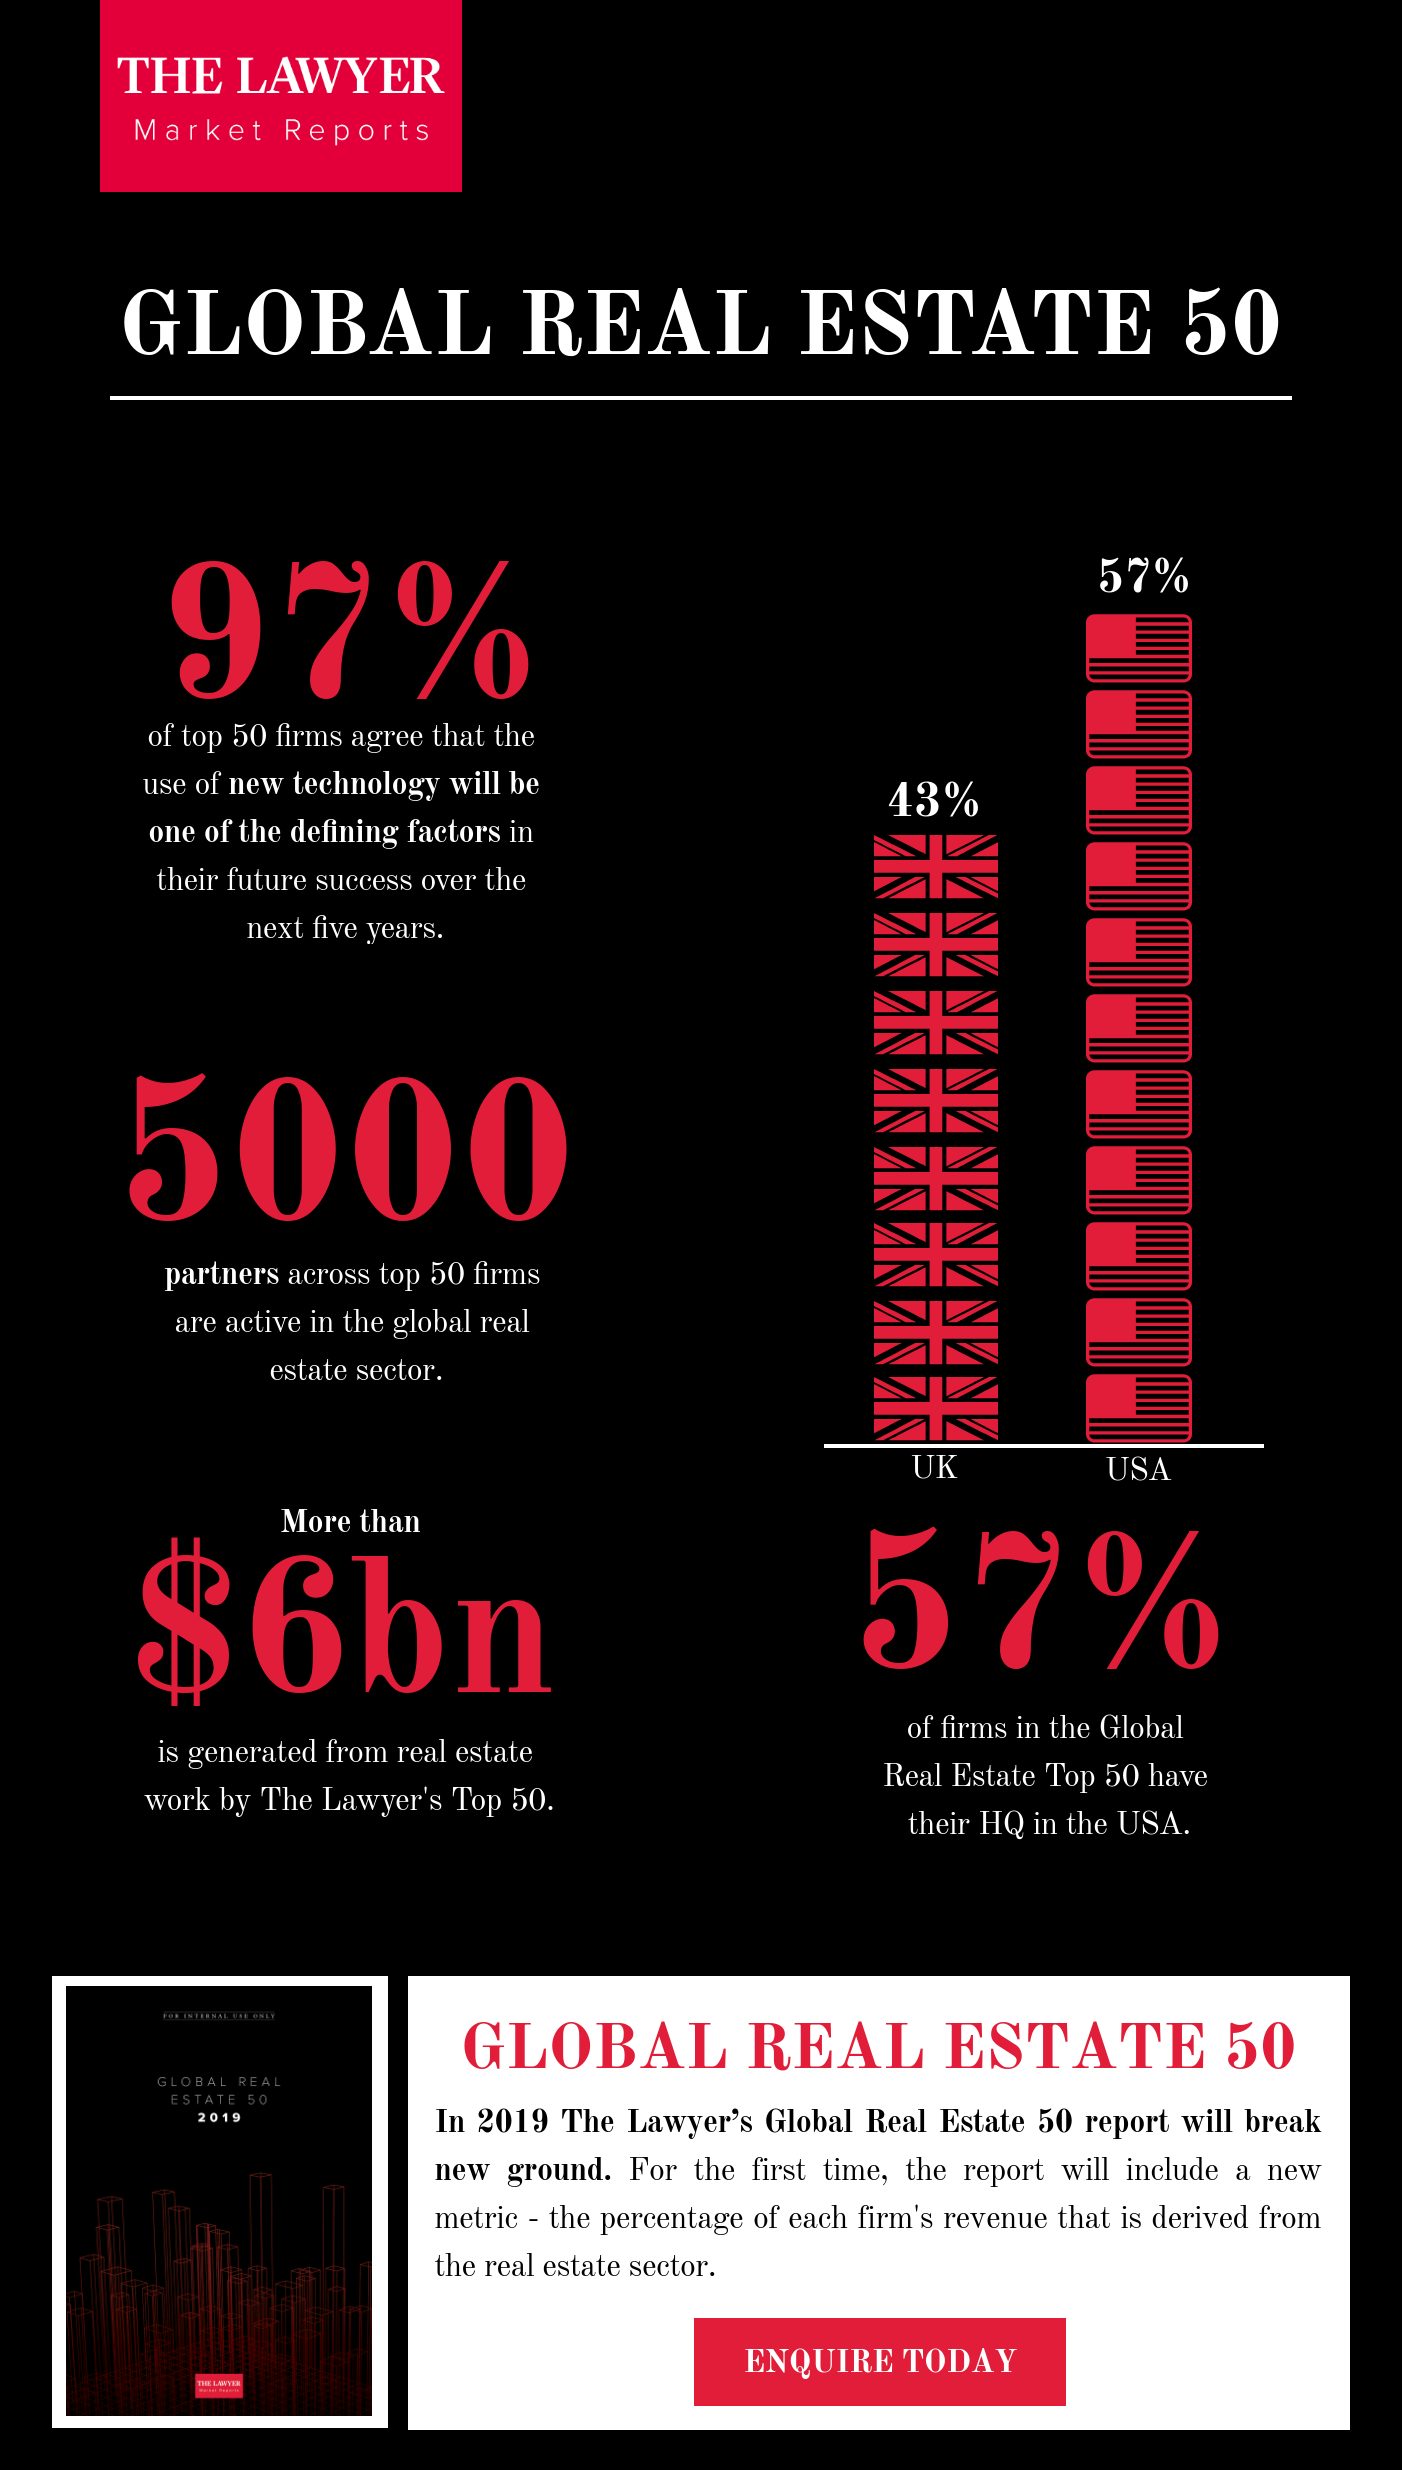 [infographic] Key statistics from Global Real Estate 50 report The